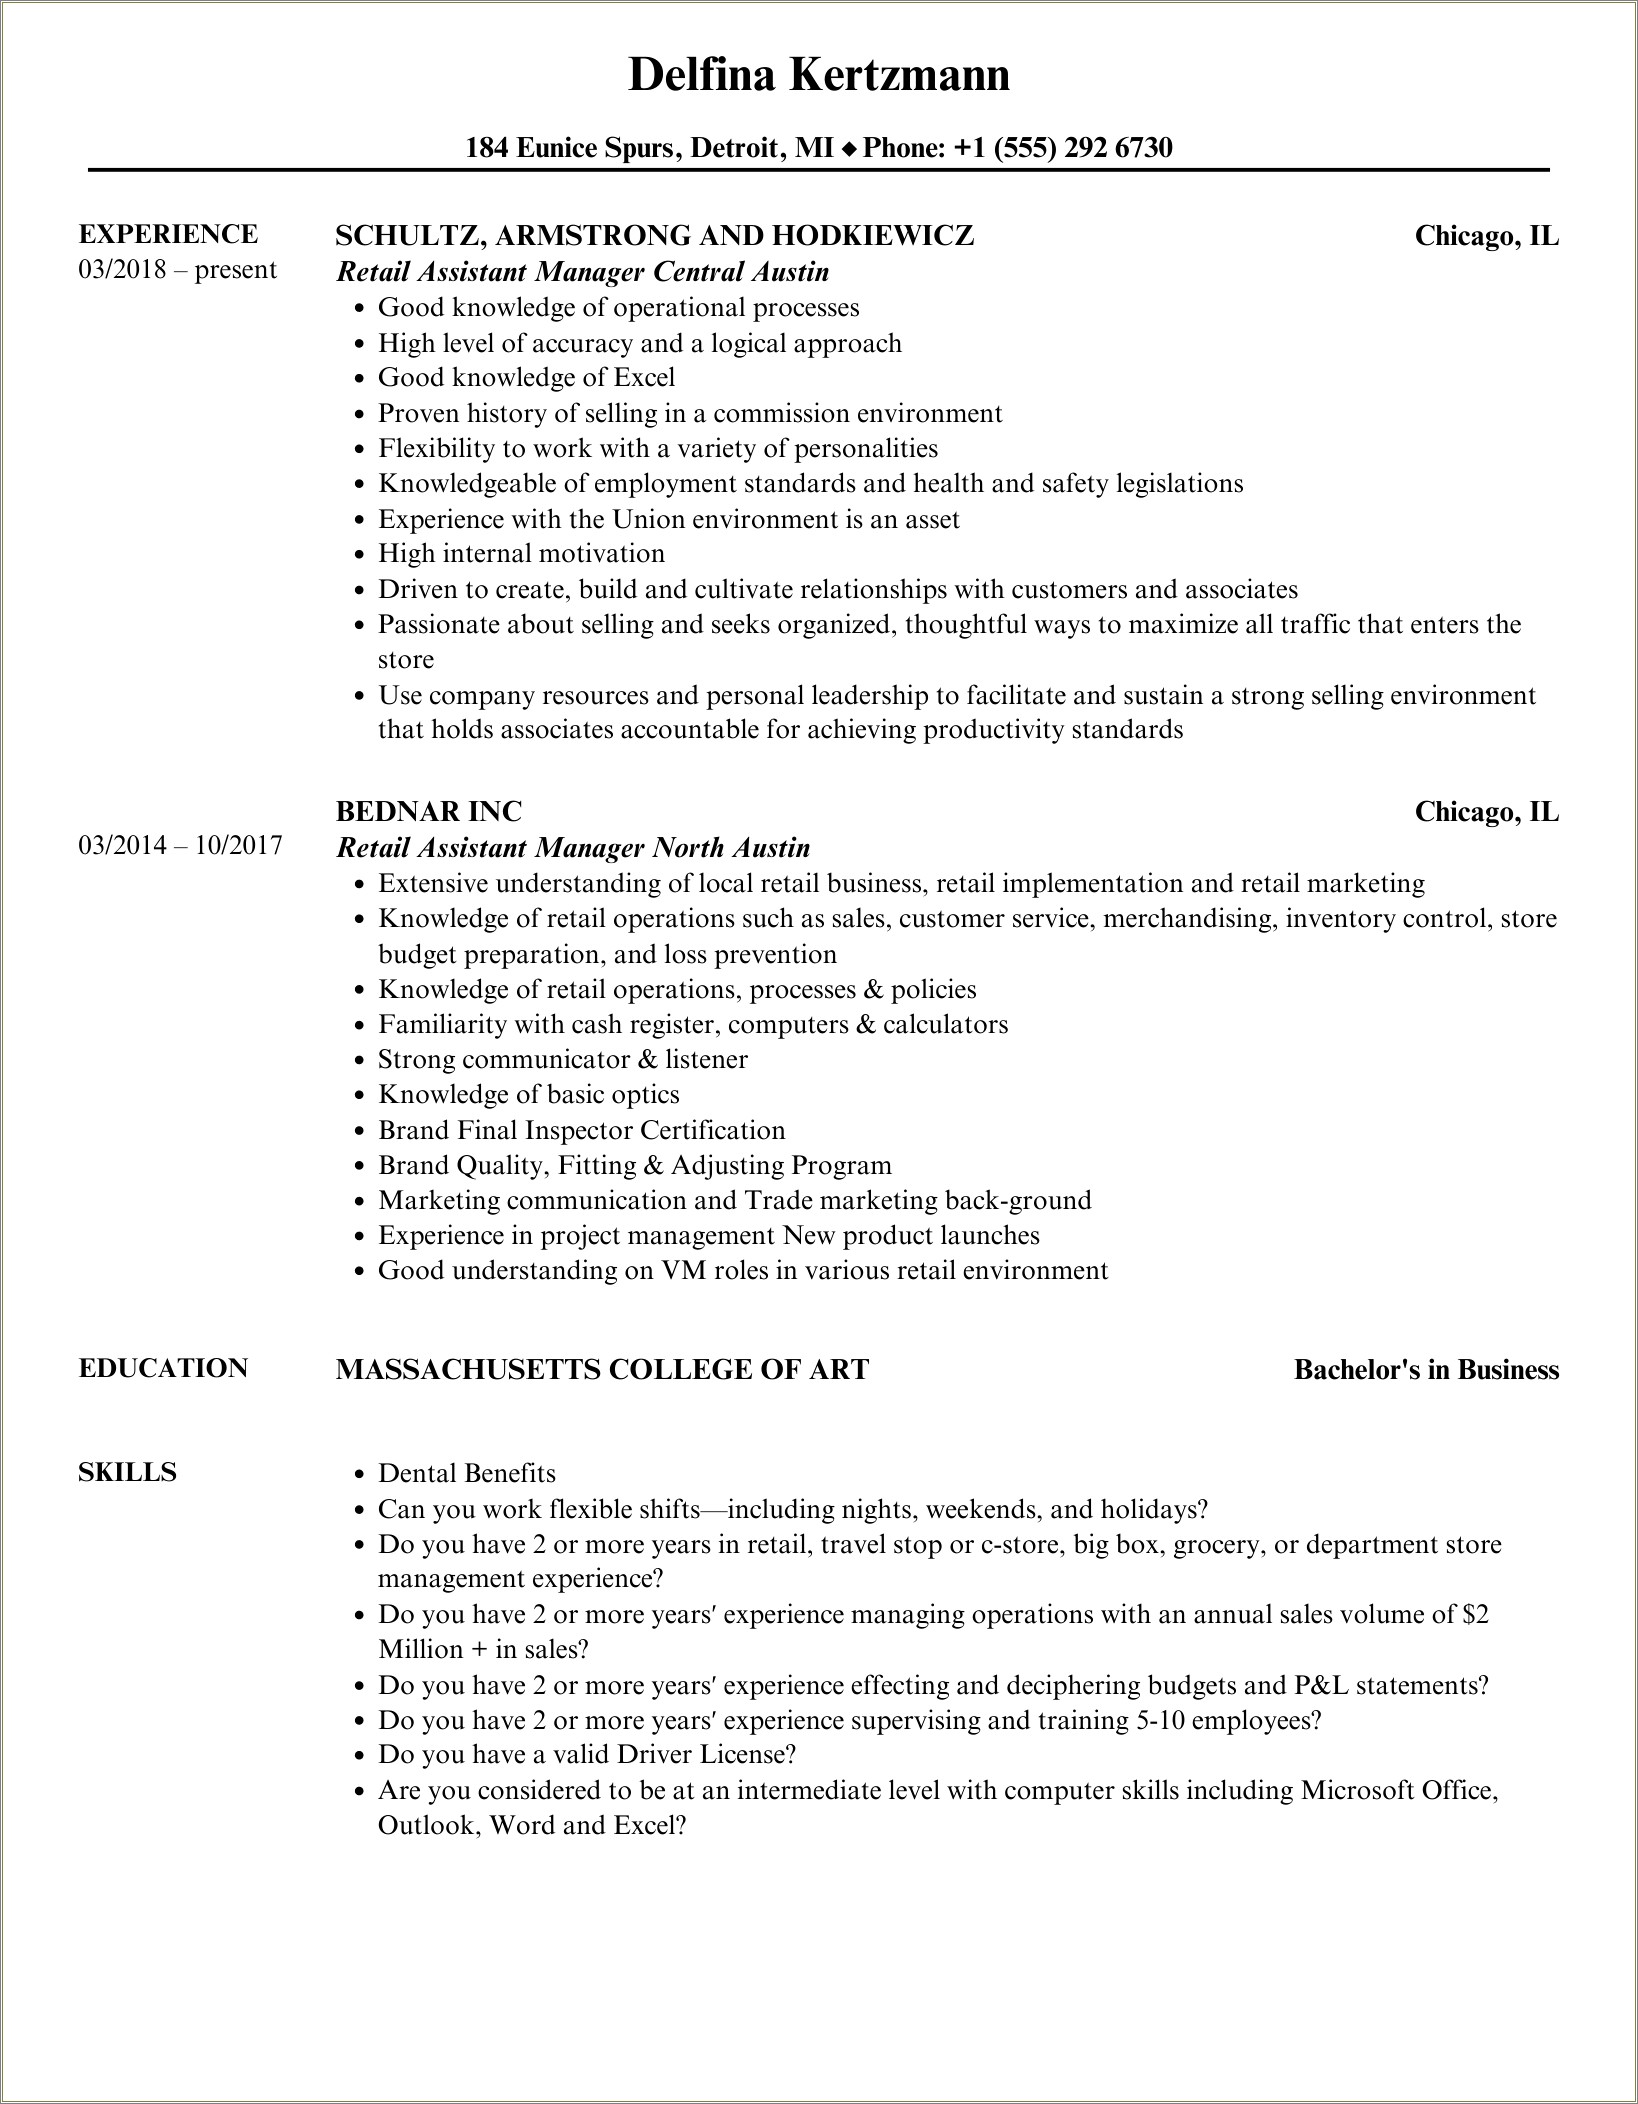 Music Store Assistant Manager Resume Sample